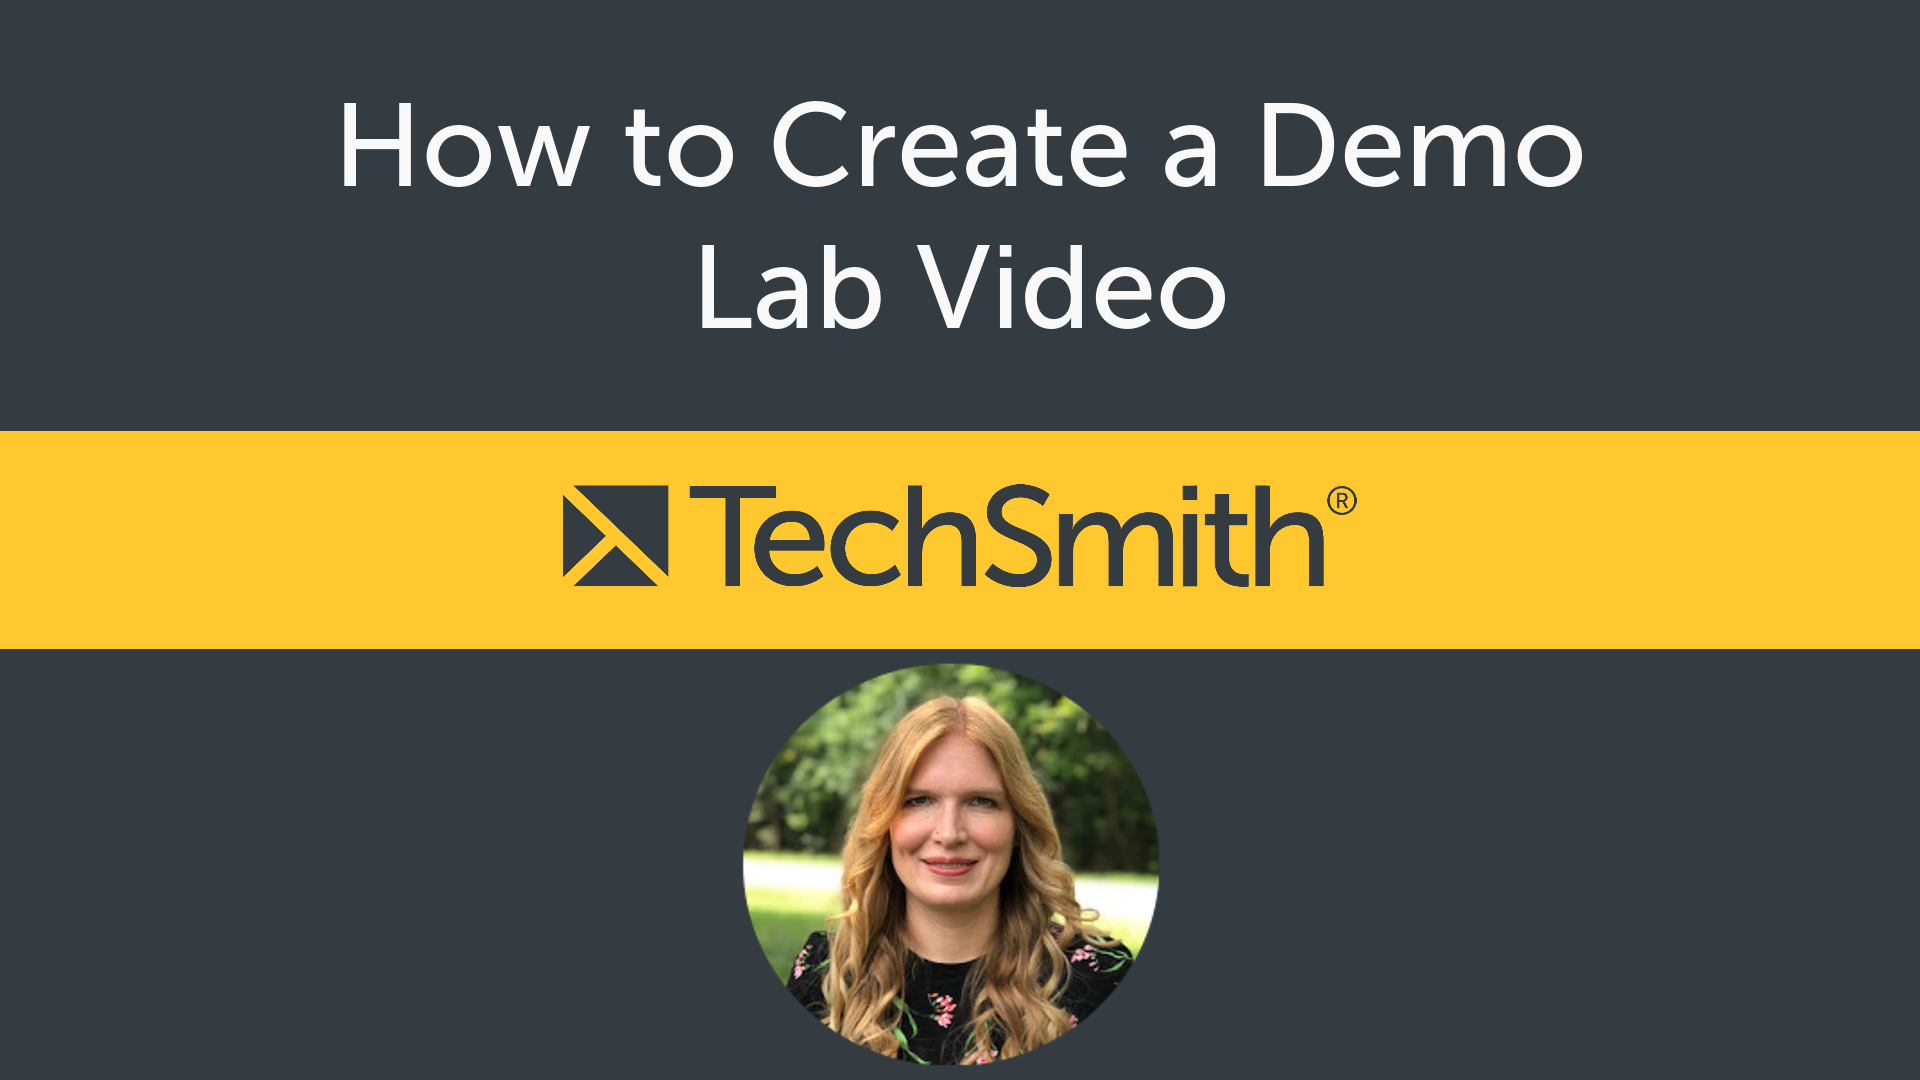 How to Create a Demo or Lab Video at Home